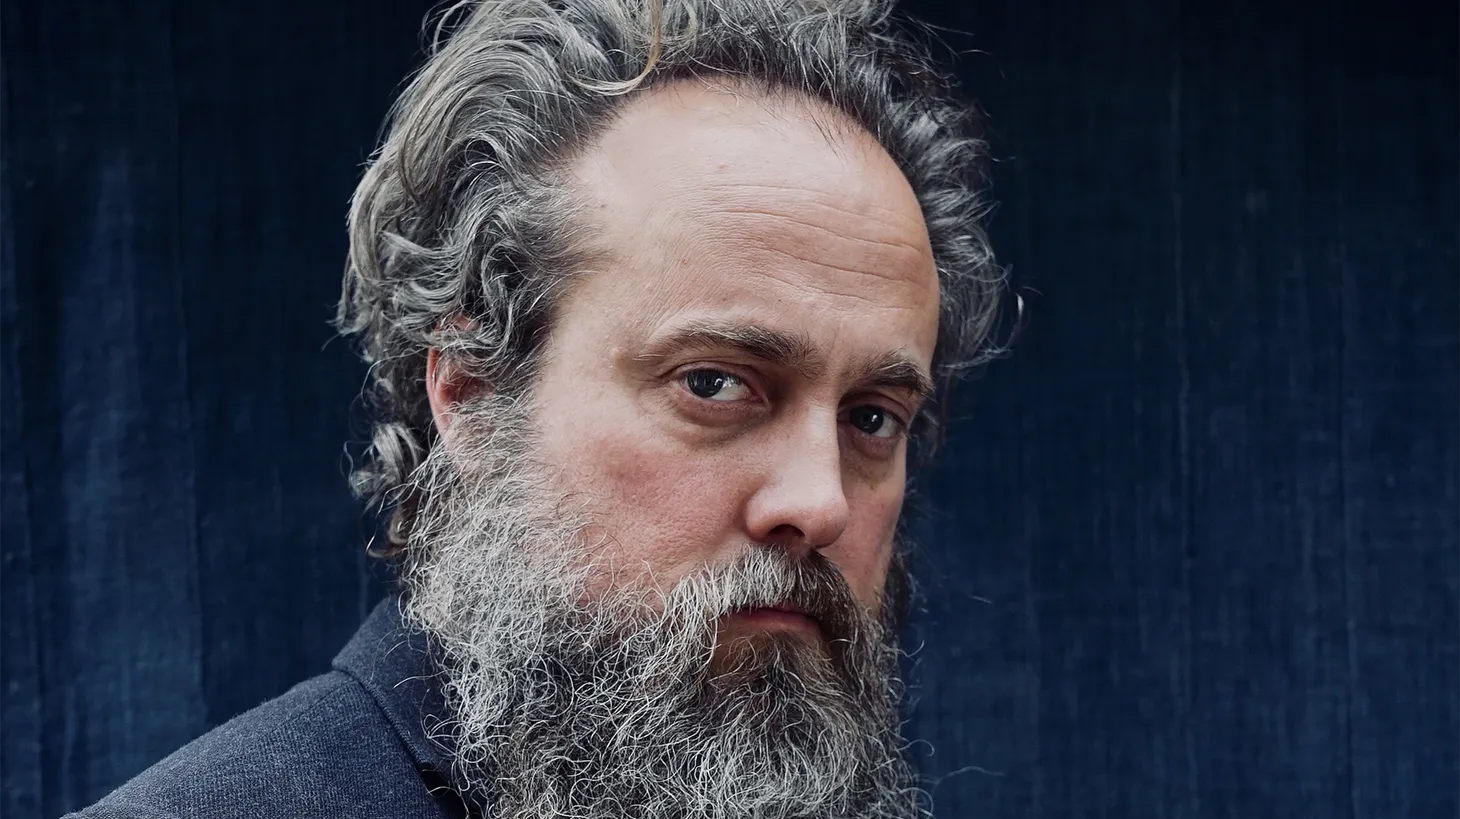 Sam Beam, the heart and soul behind Iron & Wine , wrote a shiny new song that hearkens back to the call-and-response duets of the past made famous by artists like Johnny and June, George and Tammy, Dolly and Kenny — and now, Sam and Fiona on “All…